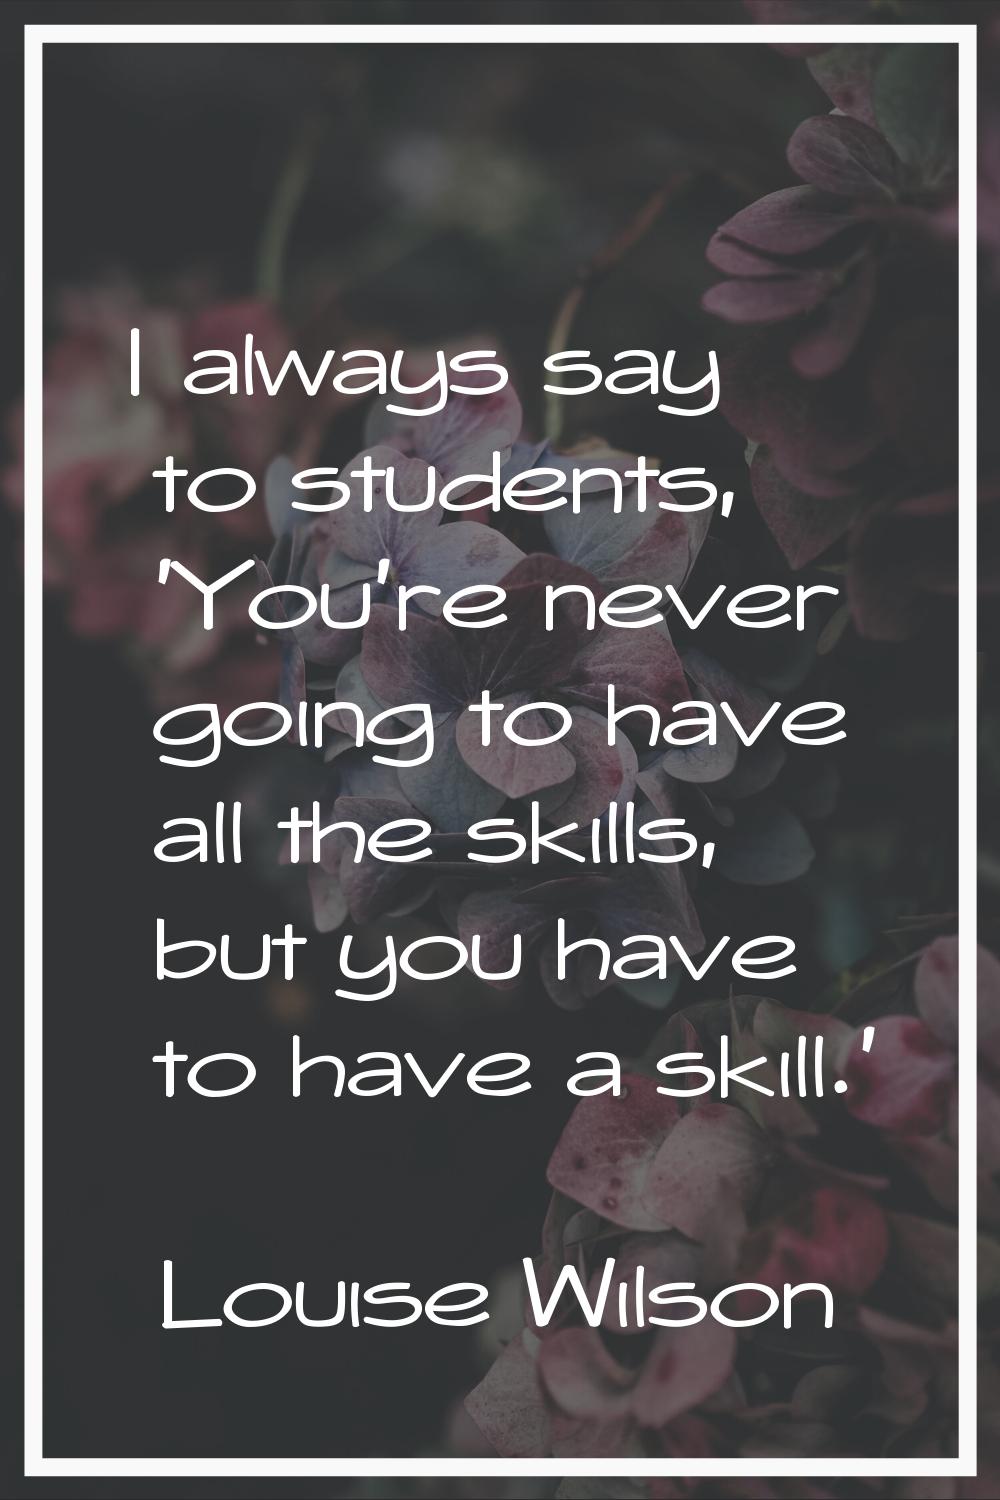 I always say to students, 'You're never going to have all the skills, but you have to have a skill.